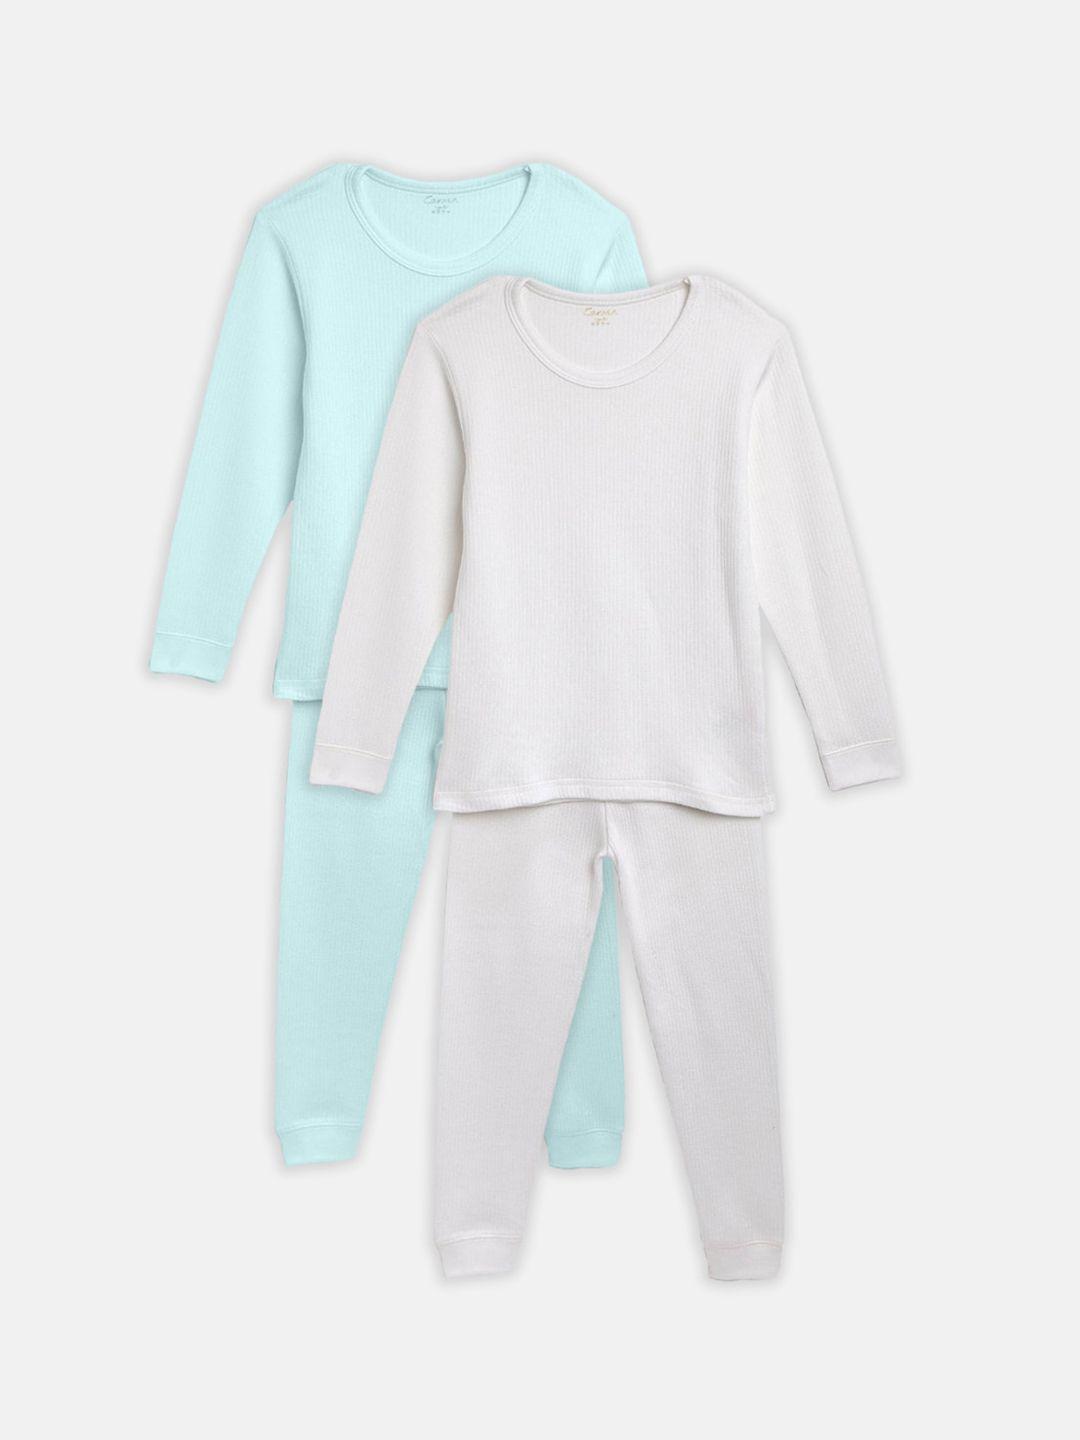 kanvin-boys-pack-of-2-turquoise-blue-&-white-solid-thermal-sets